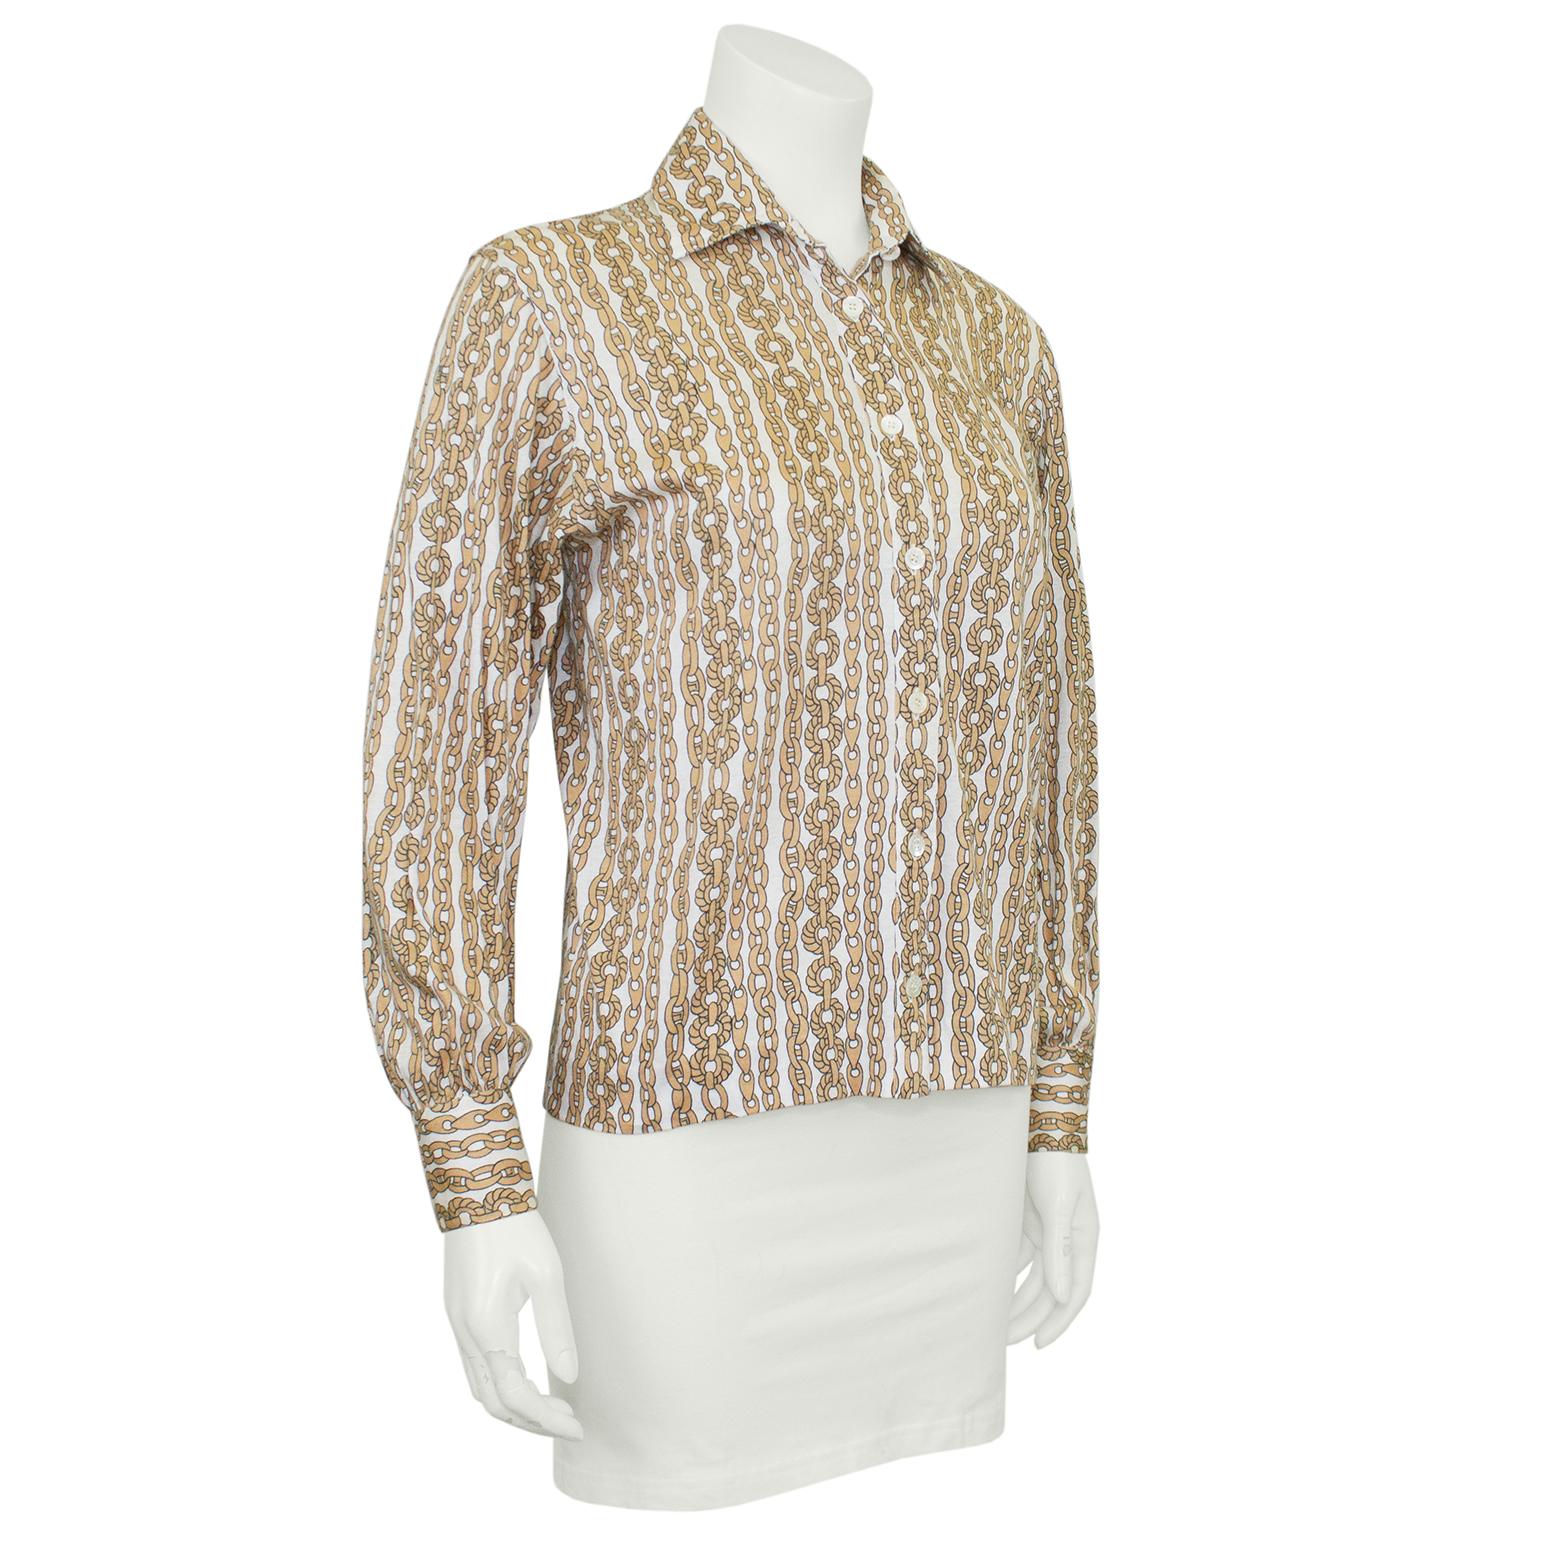 Classic Celine button down cotton top from the 1970s for the Canadian boutique Ira Berg. The blouse features an iconic Celine motif of vertical chains in light beige/taupe on a white background. Perfect with jeans or tucked into a classic Celine